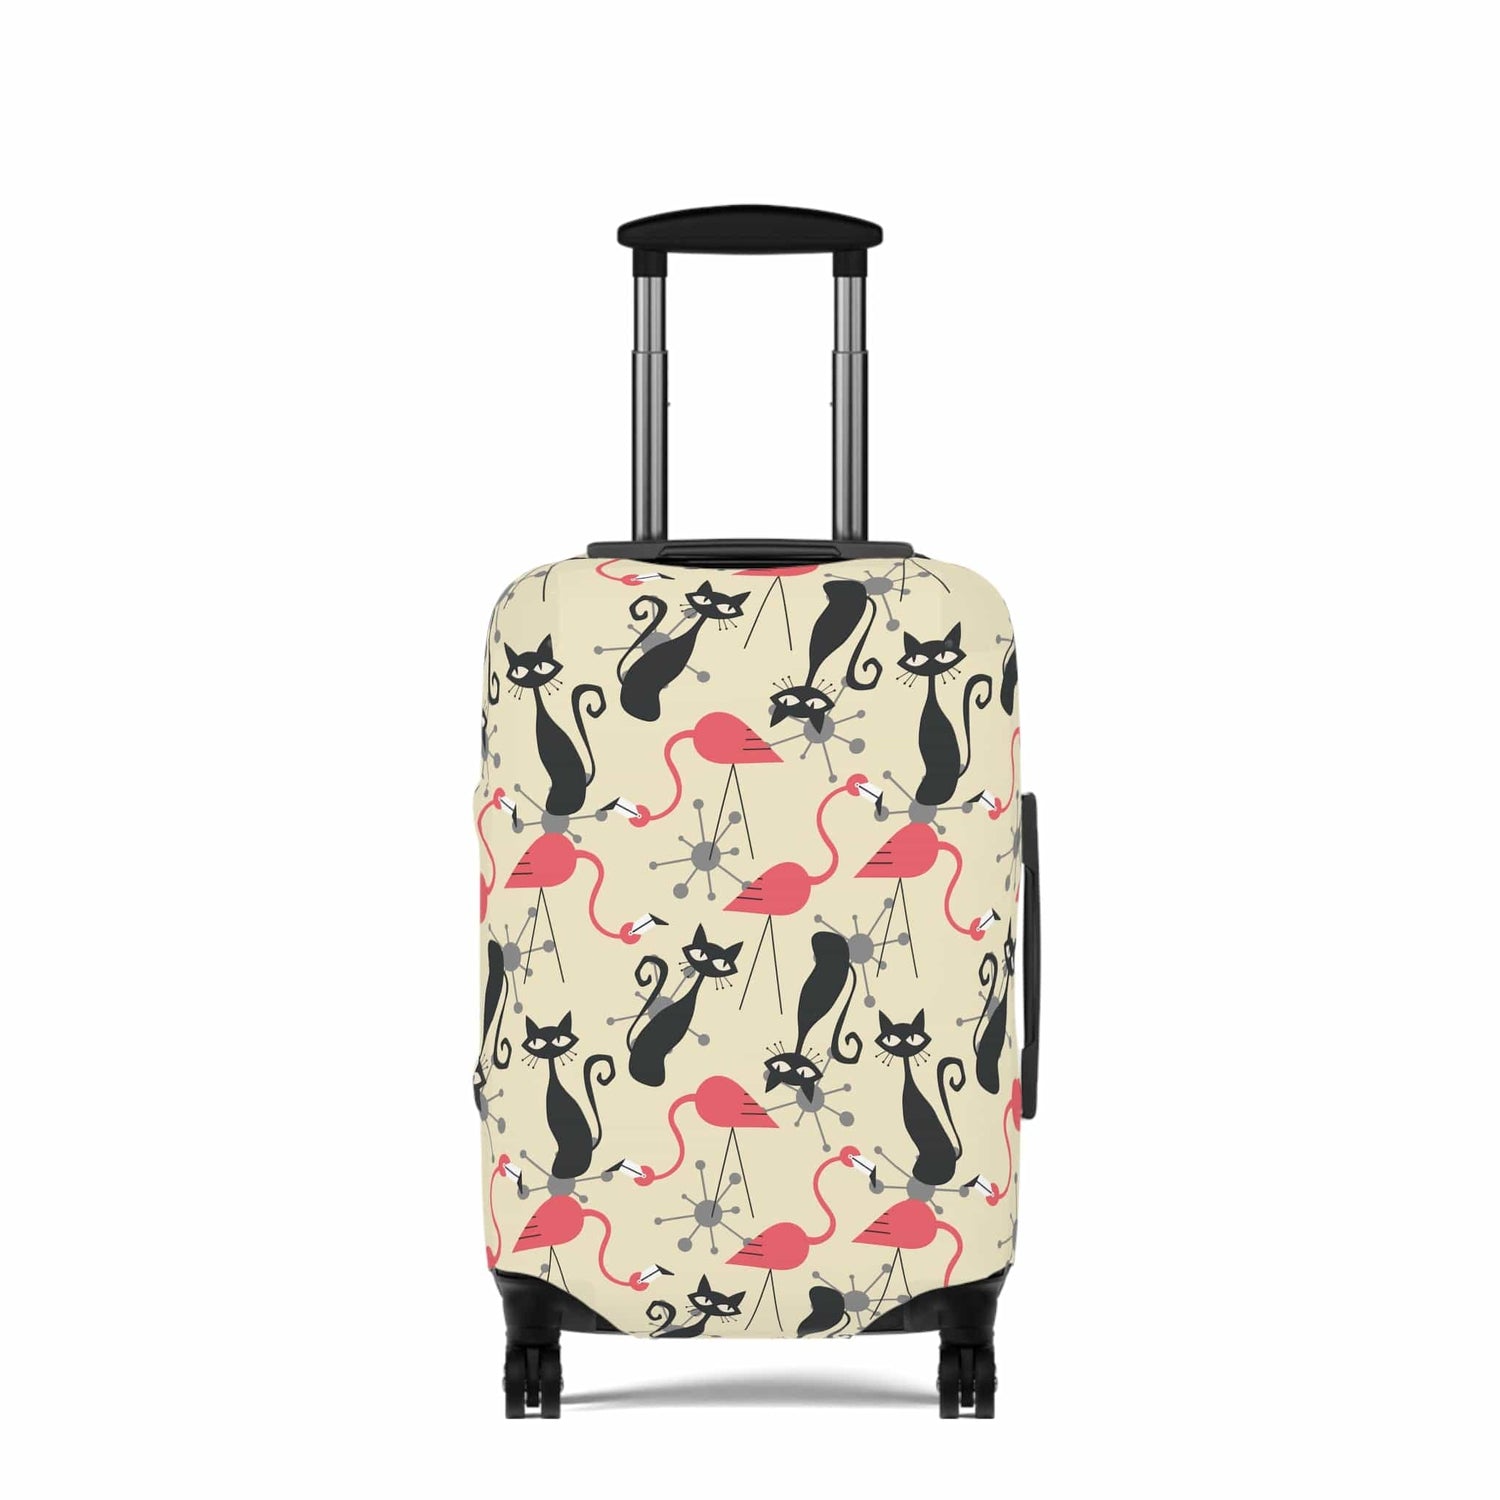 Printify Atomic Cat, Flamingo Mid Century Modern Luggage Cover, Retro Whimsy MCM Starburst Cream, Pink, Gray Suitcase Protector Accessories